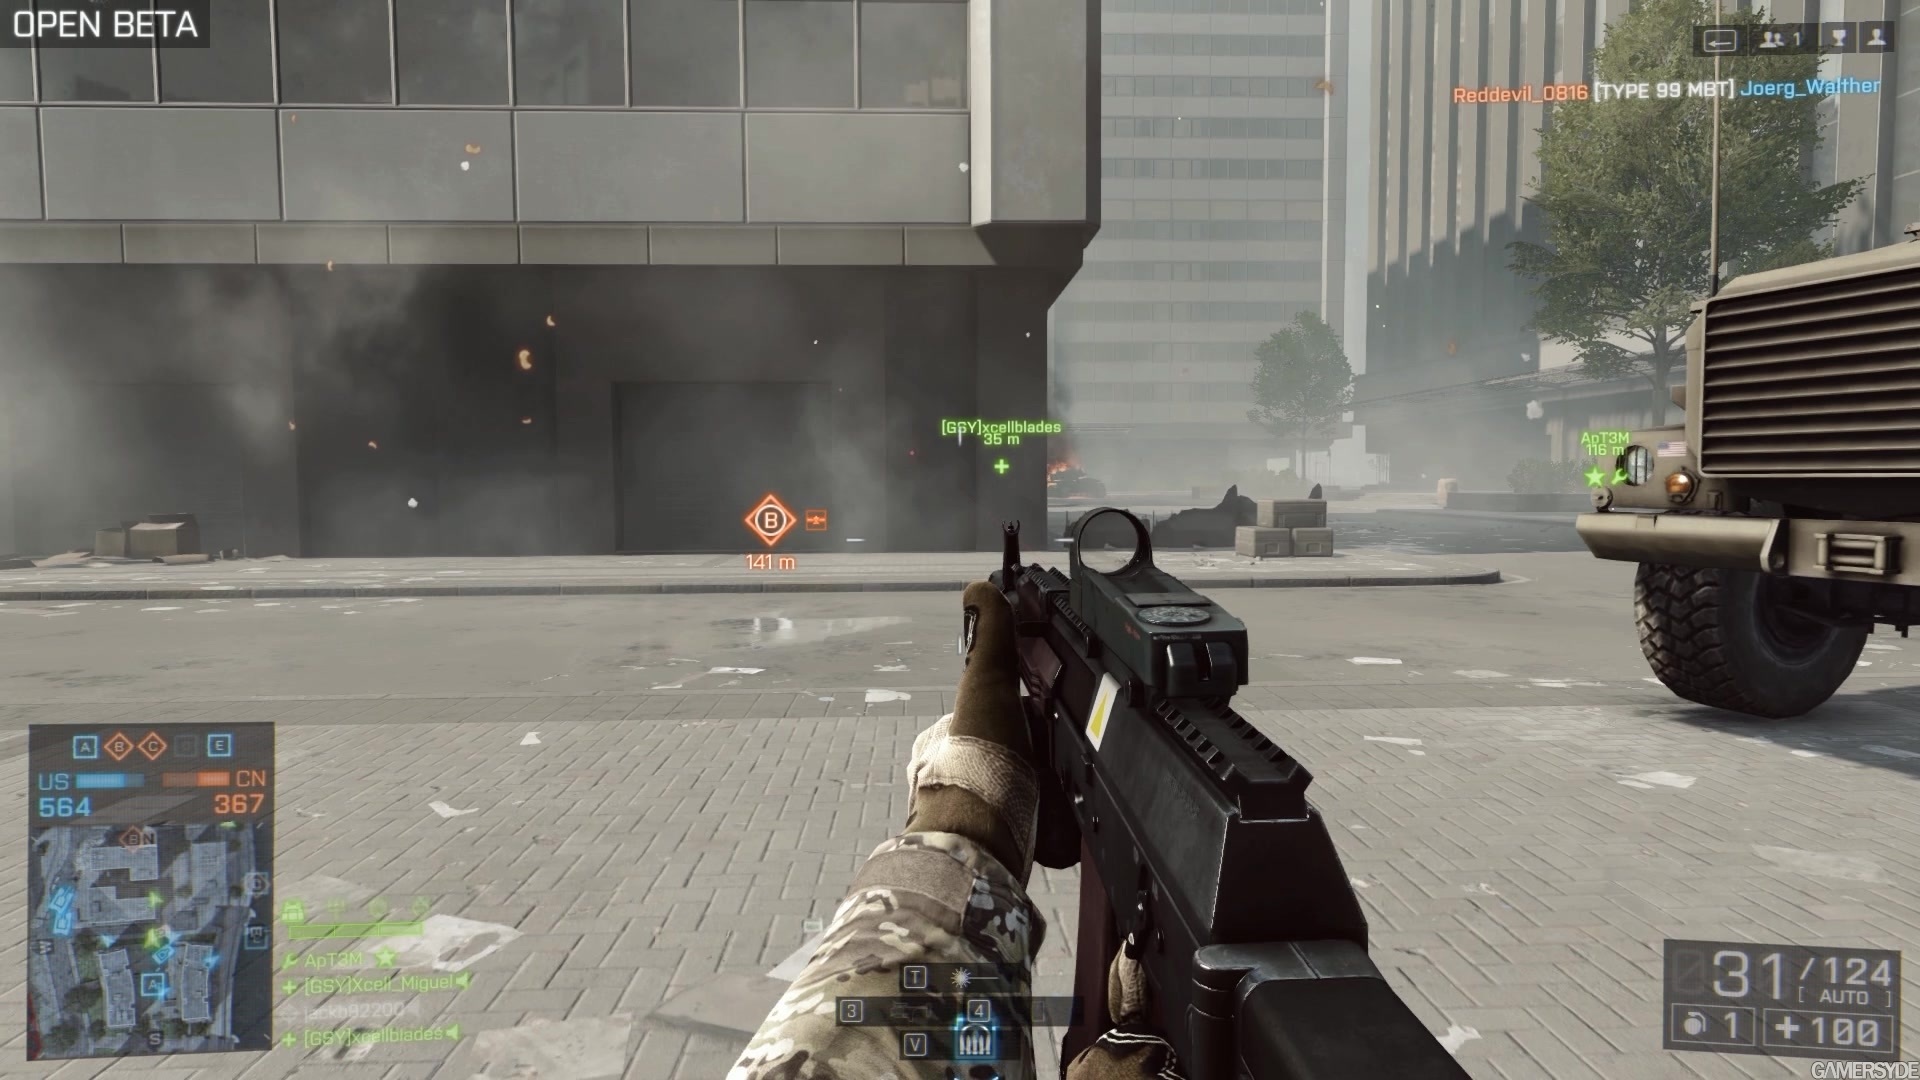 Battlefield 4 - Gameplay #3 (PC) - High quality stream and